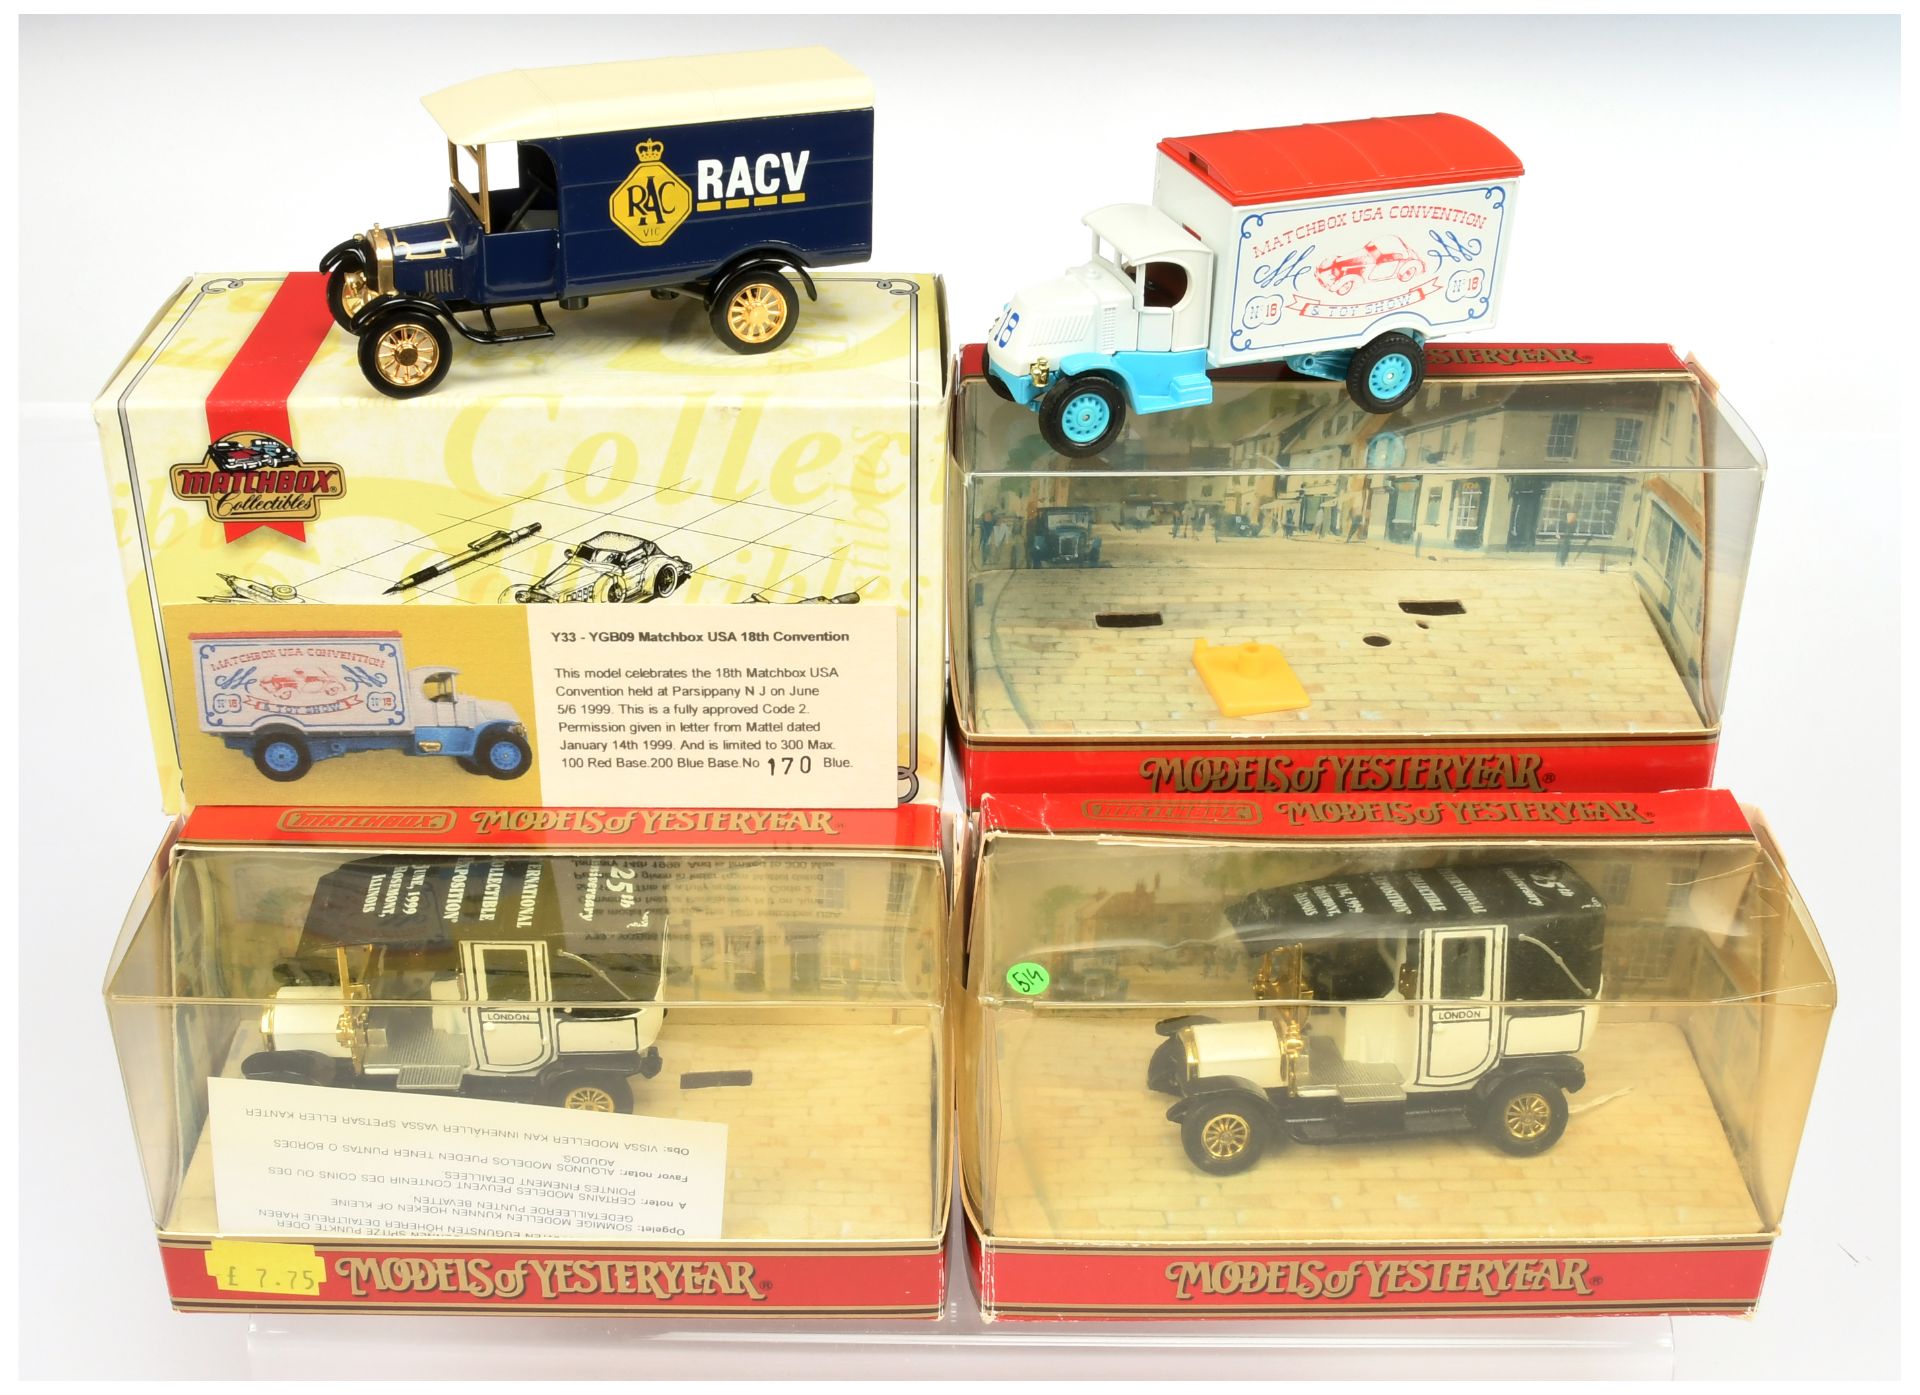 Matchbox Models of Yesteryear Code 2 issues (1) Y33 1930 Mack AC Truck "Matchbox US Convention To...